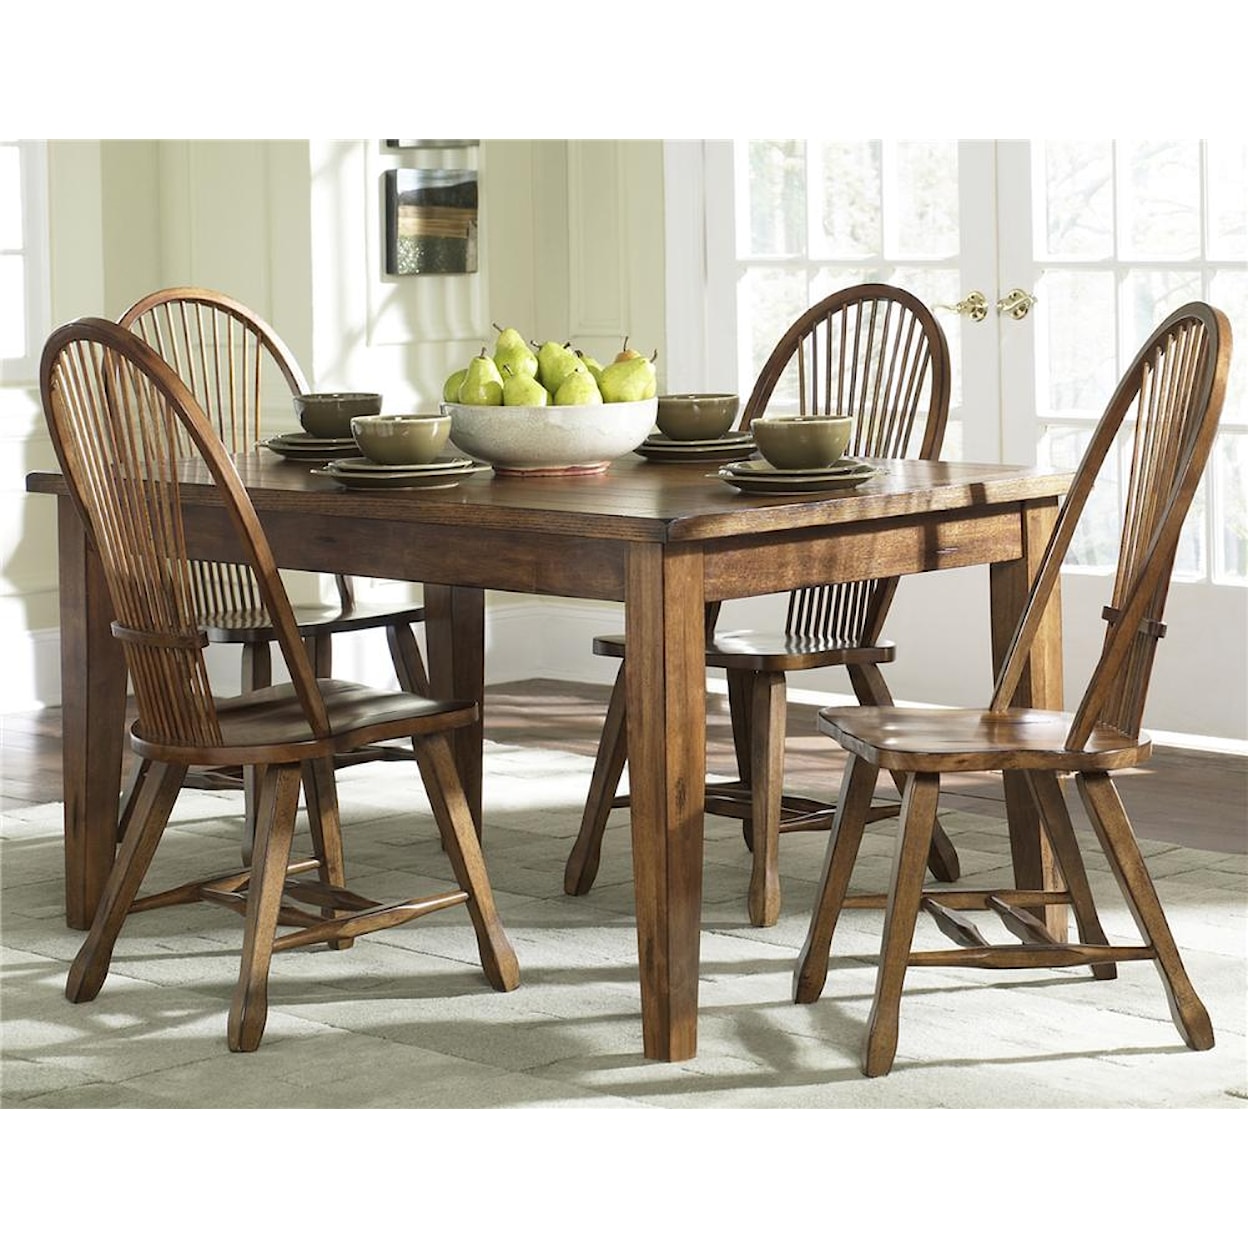 Libby Treasures 17 Dining Table